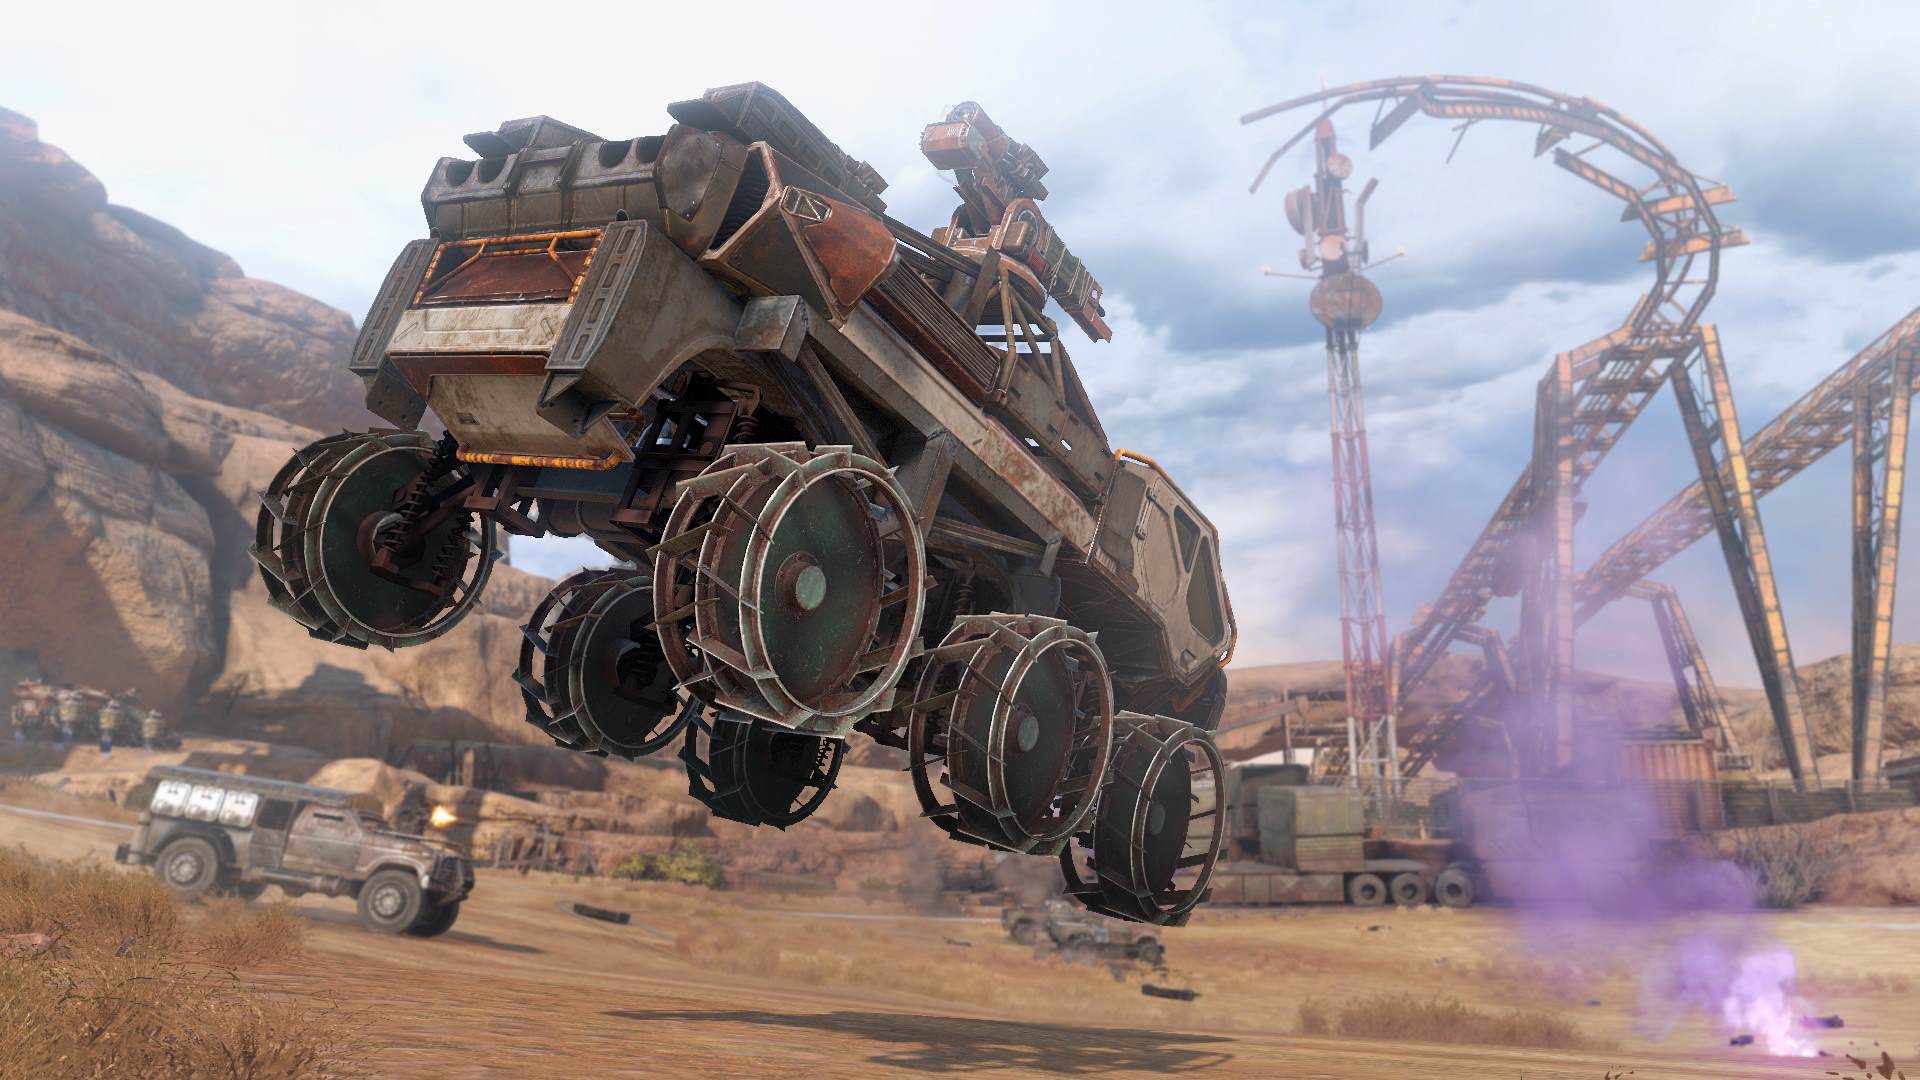 download crossout ps4 for free